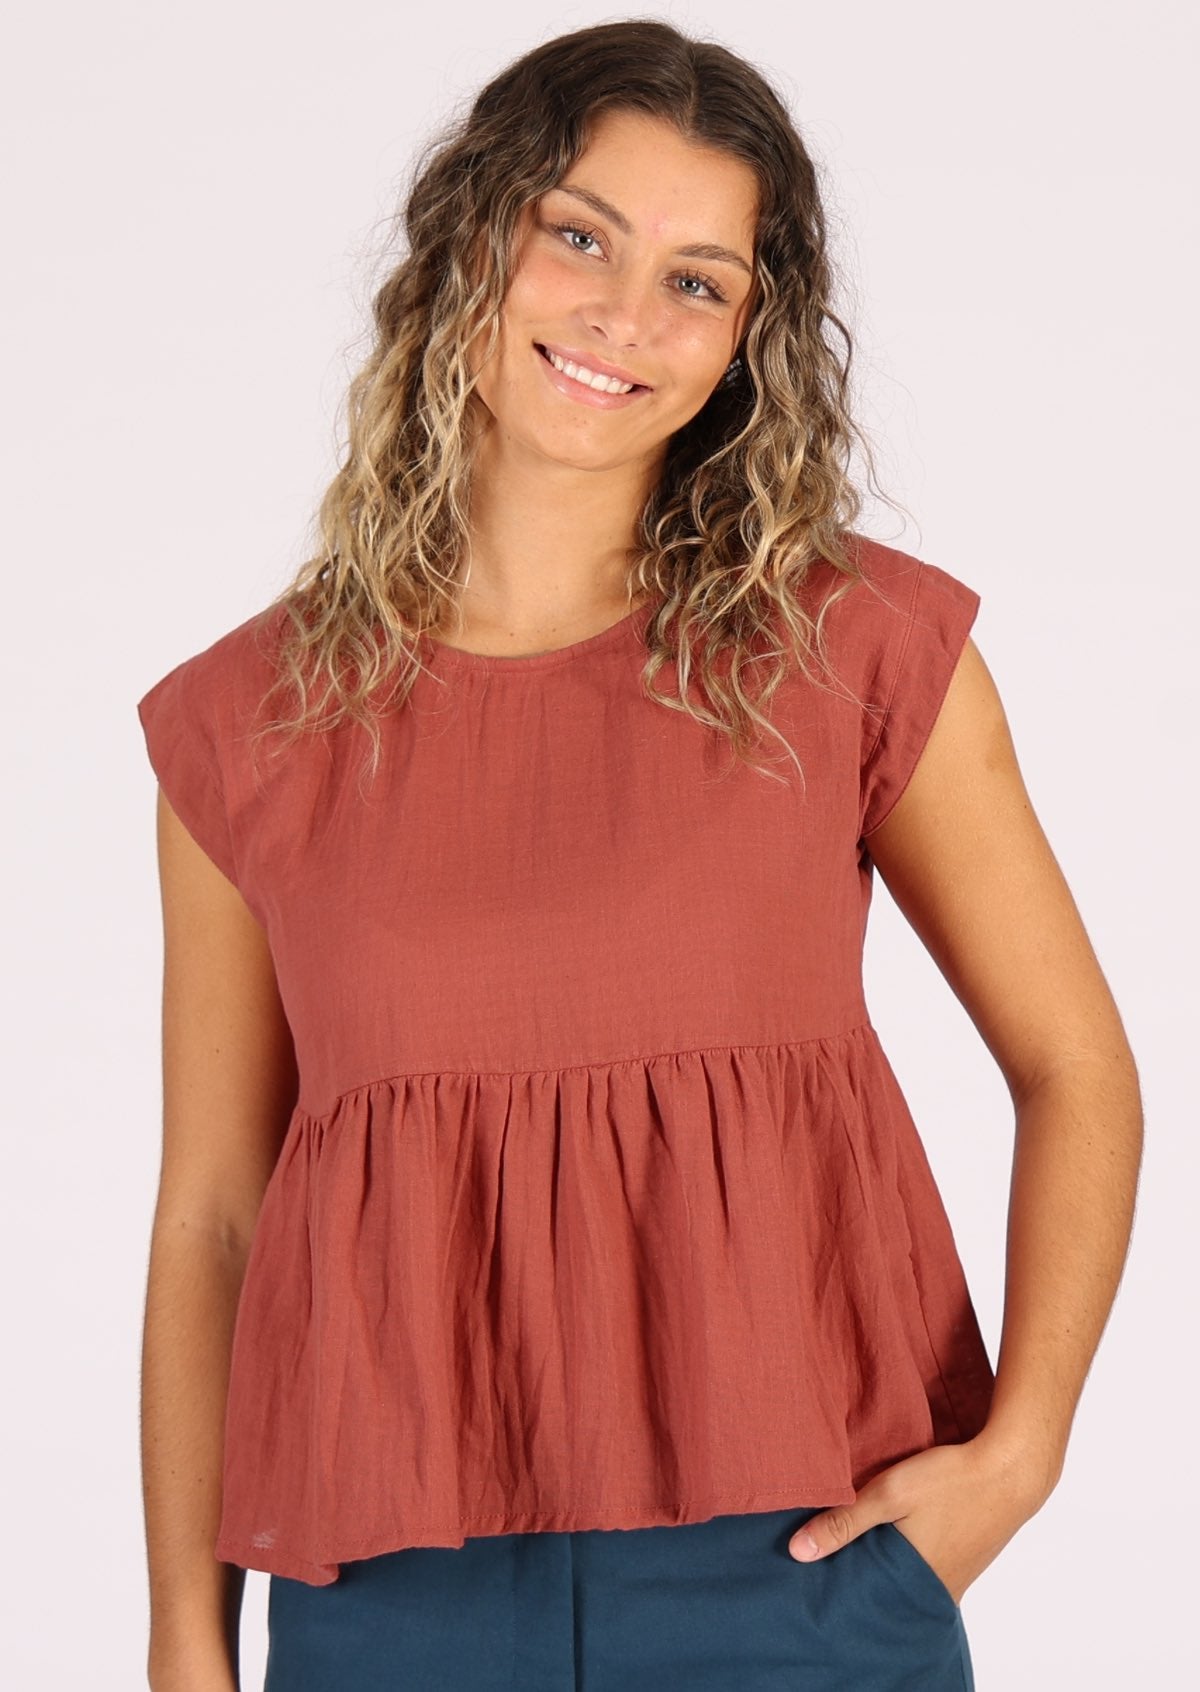 Cotton gauze terracotta coloured top with ruffle under the bust